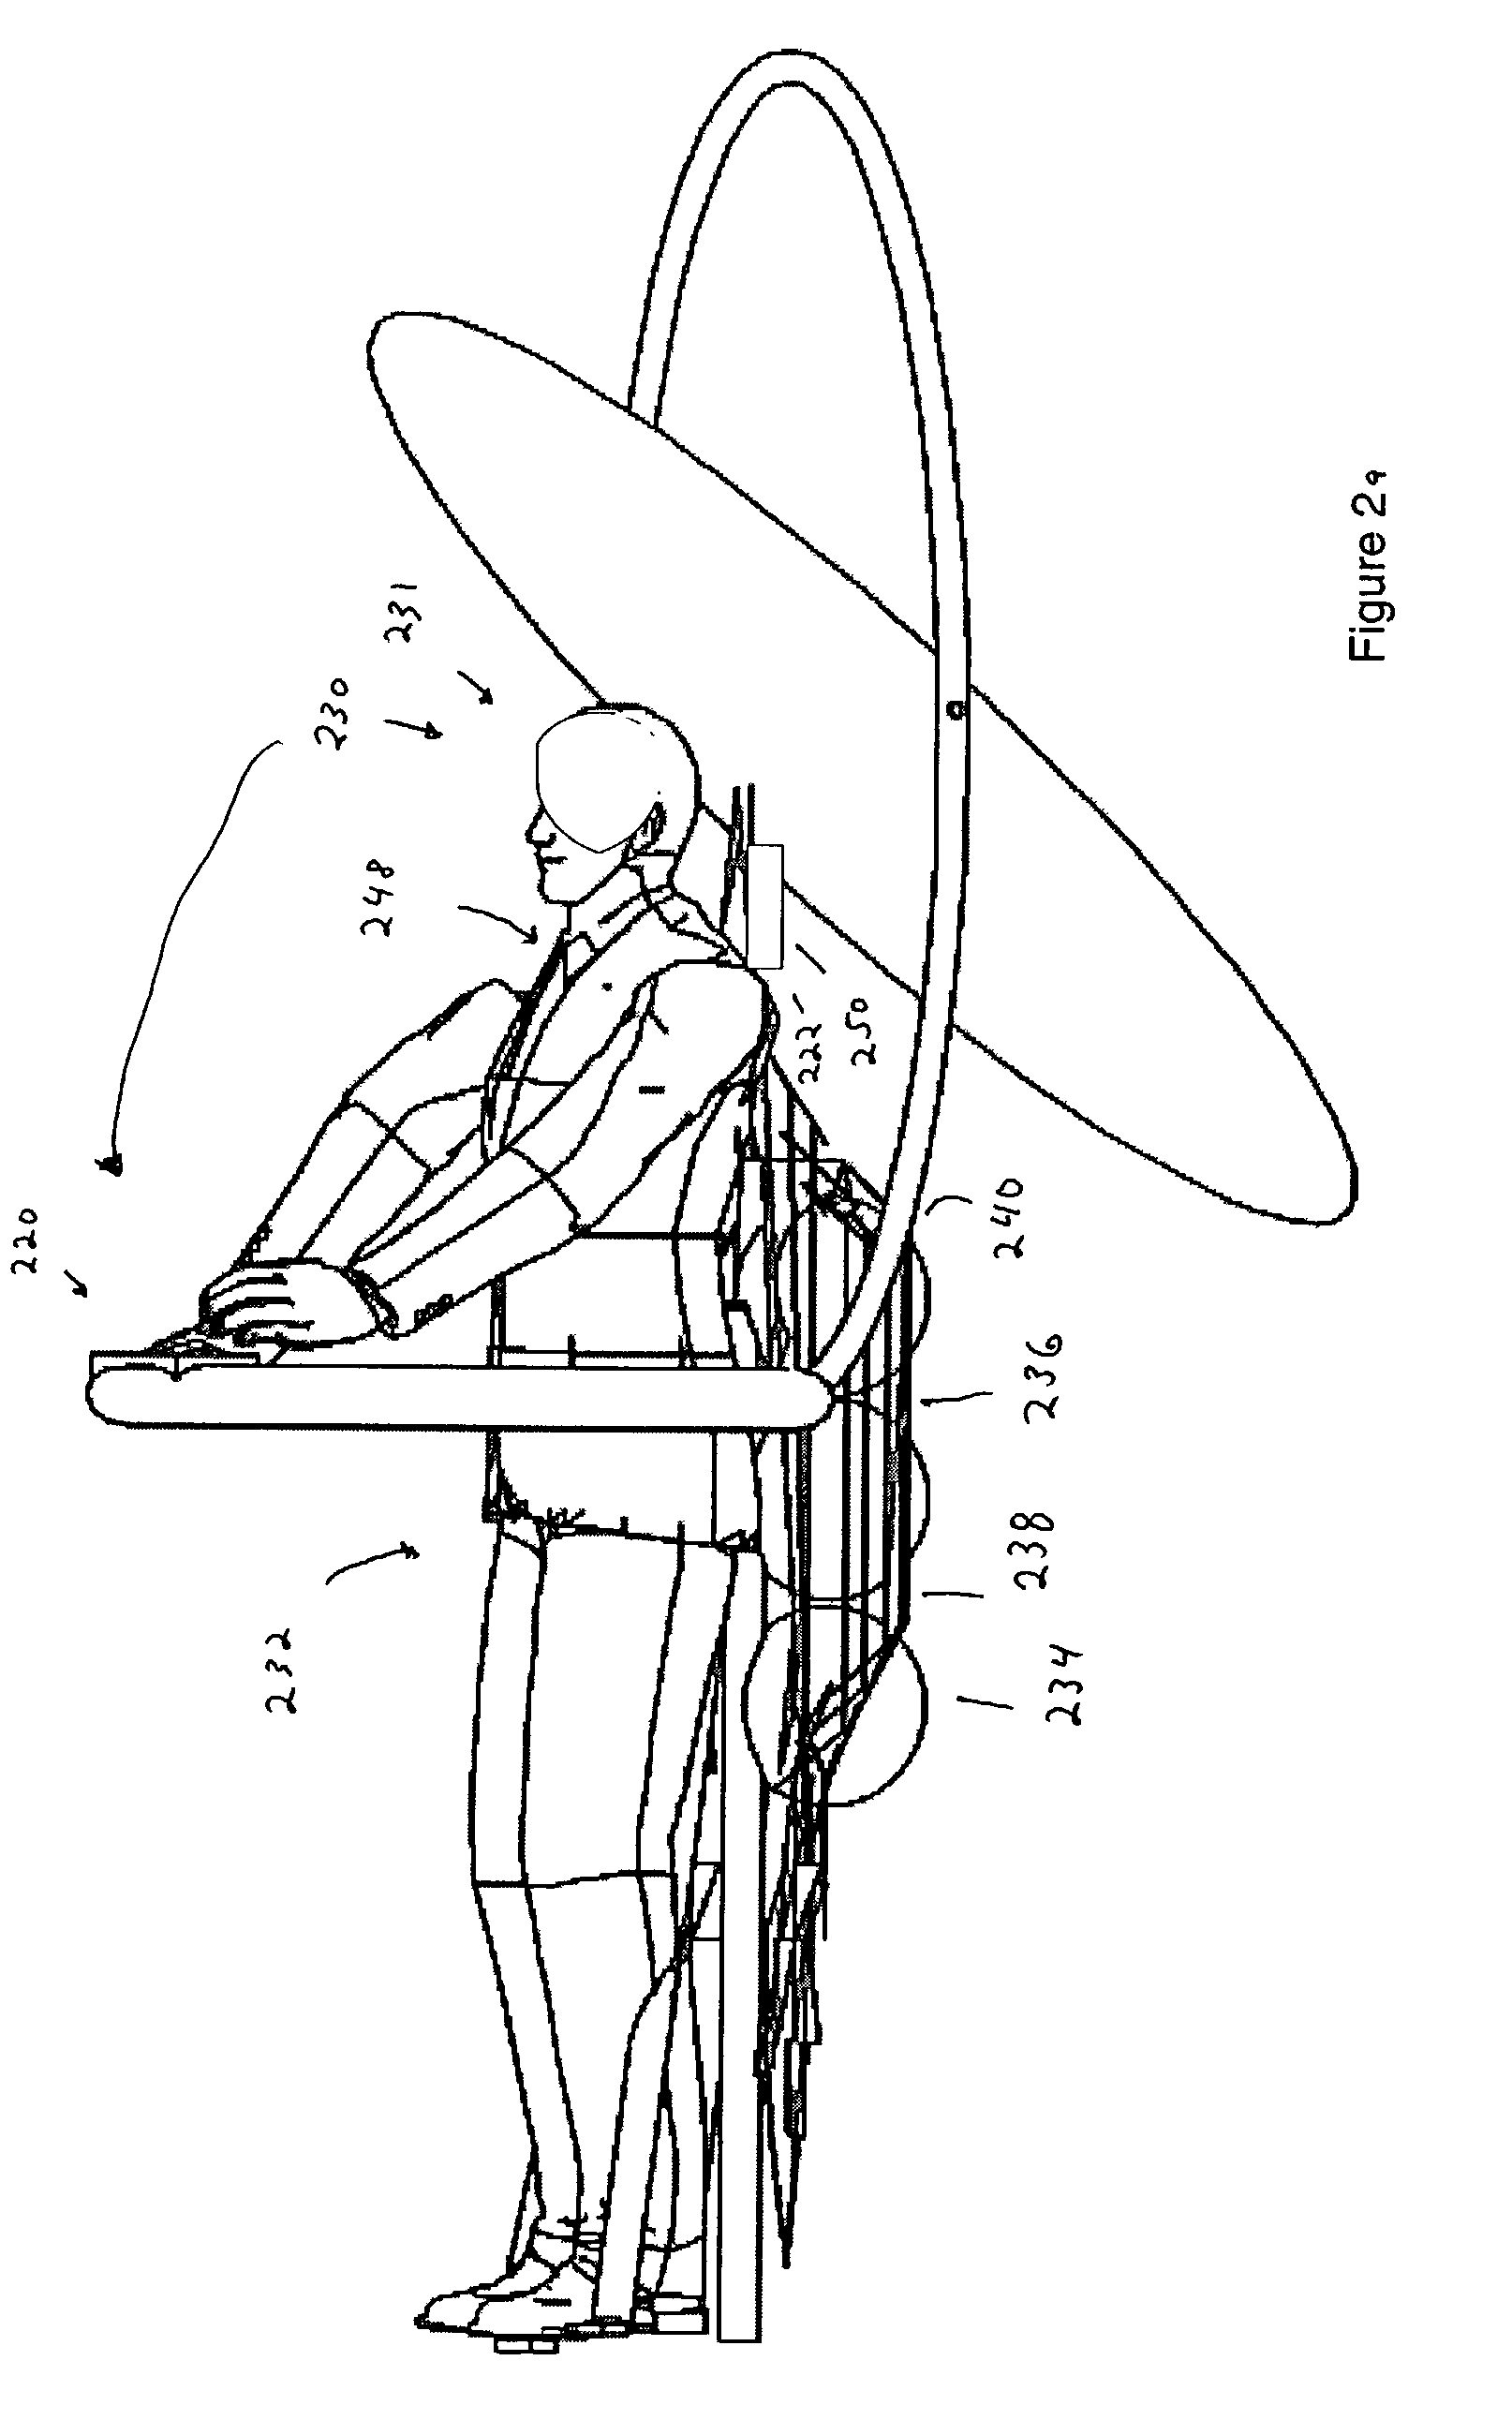 Personal flight vehicle and system